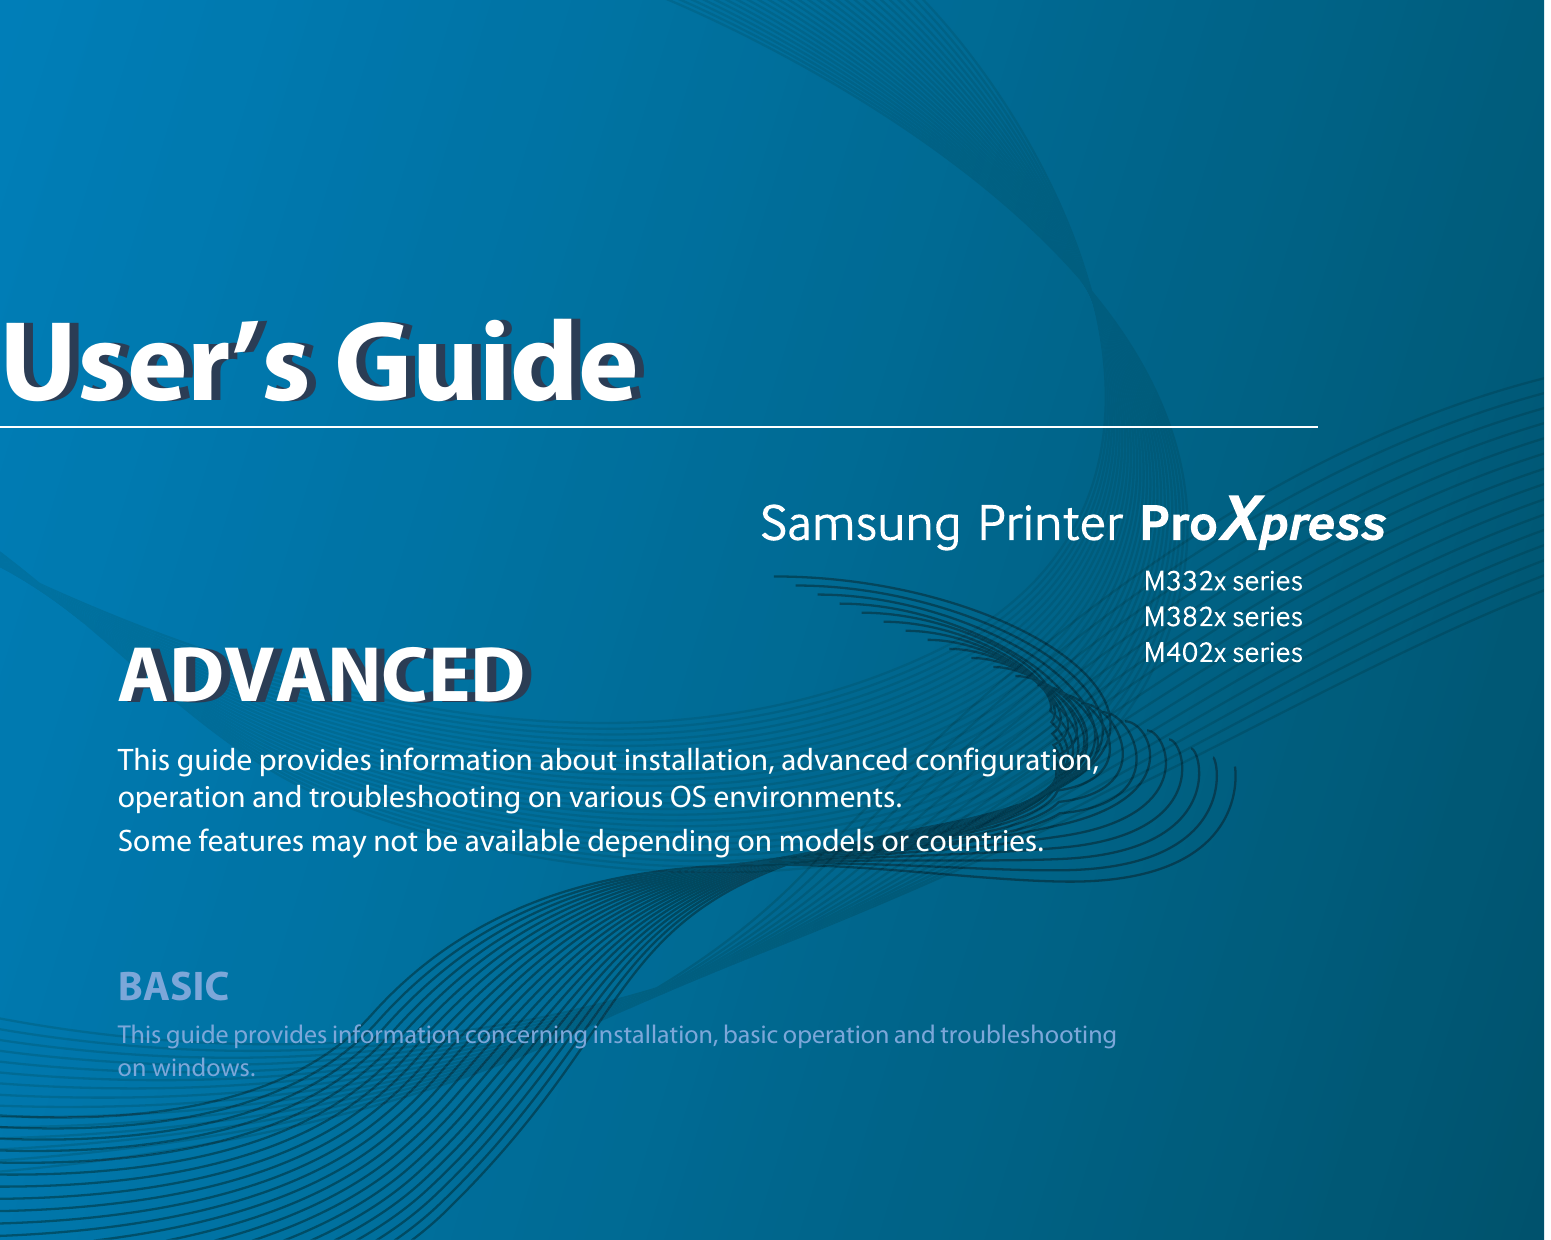 ADVANCEDUser’s GuideADVANCEDUser’s GuideThis guide provides information about installation, advanced configuration, operation and troubleshooting on various OS environments. Some features may not be available depending on models or countries.BASICThis guide provides information concerning installation, basic operation and troubleshooting on windows.